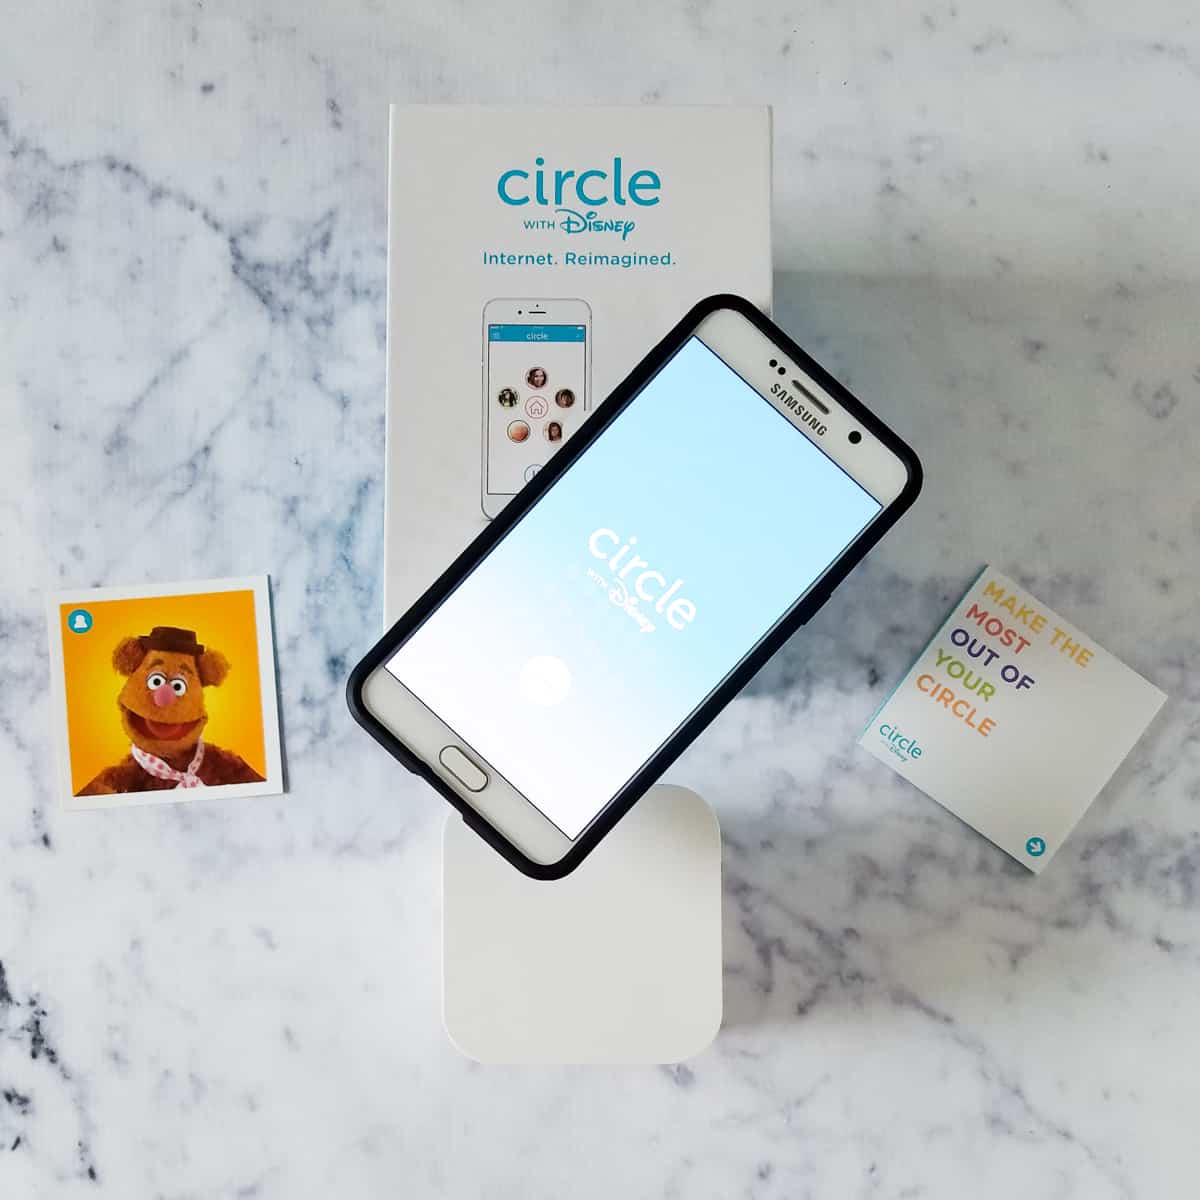 circle with disney review